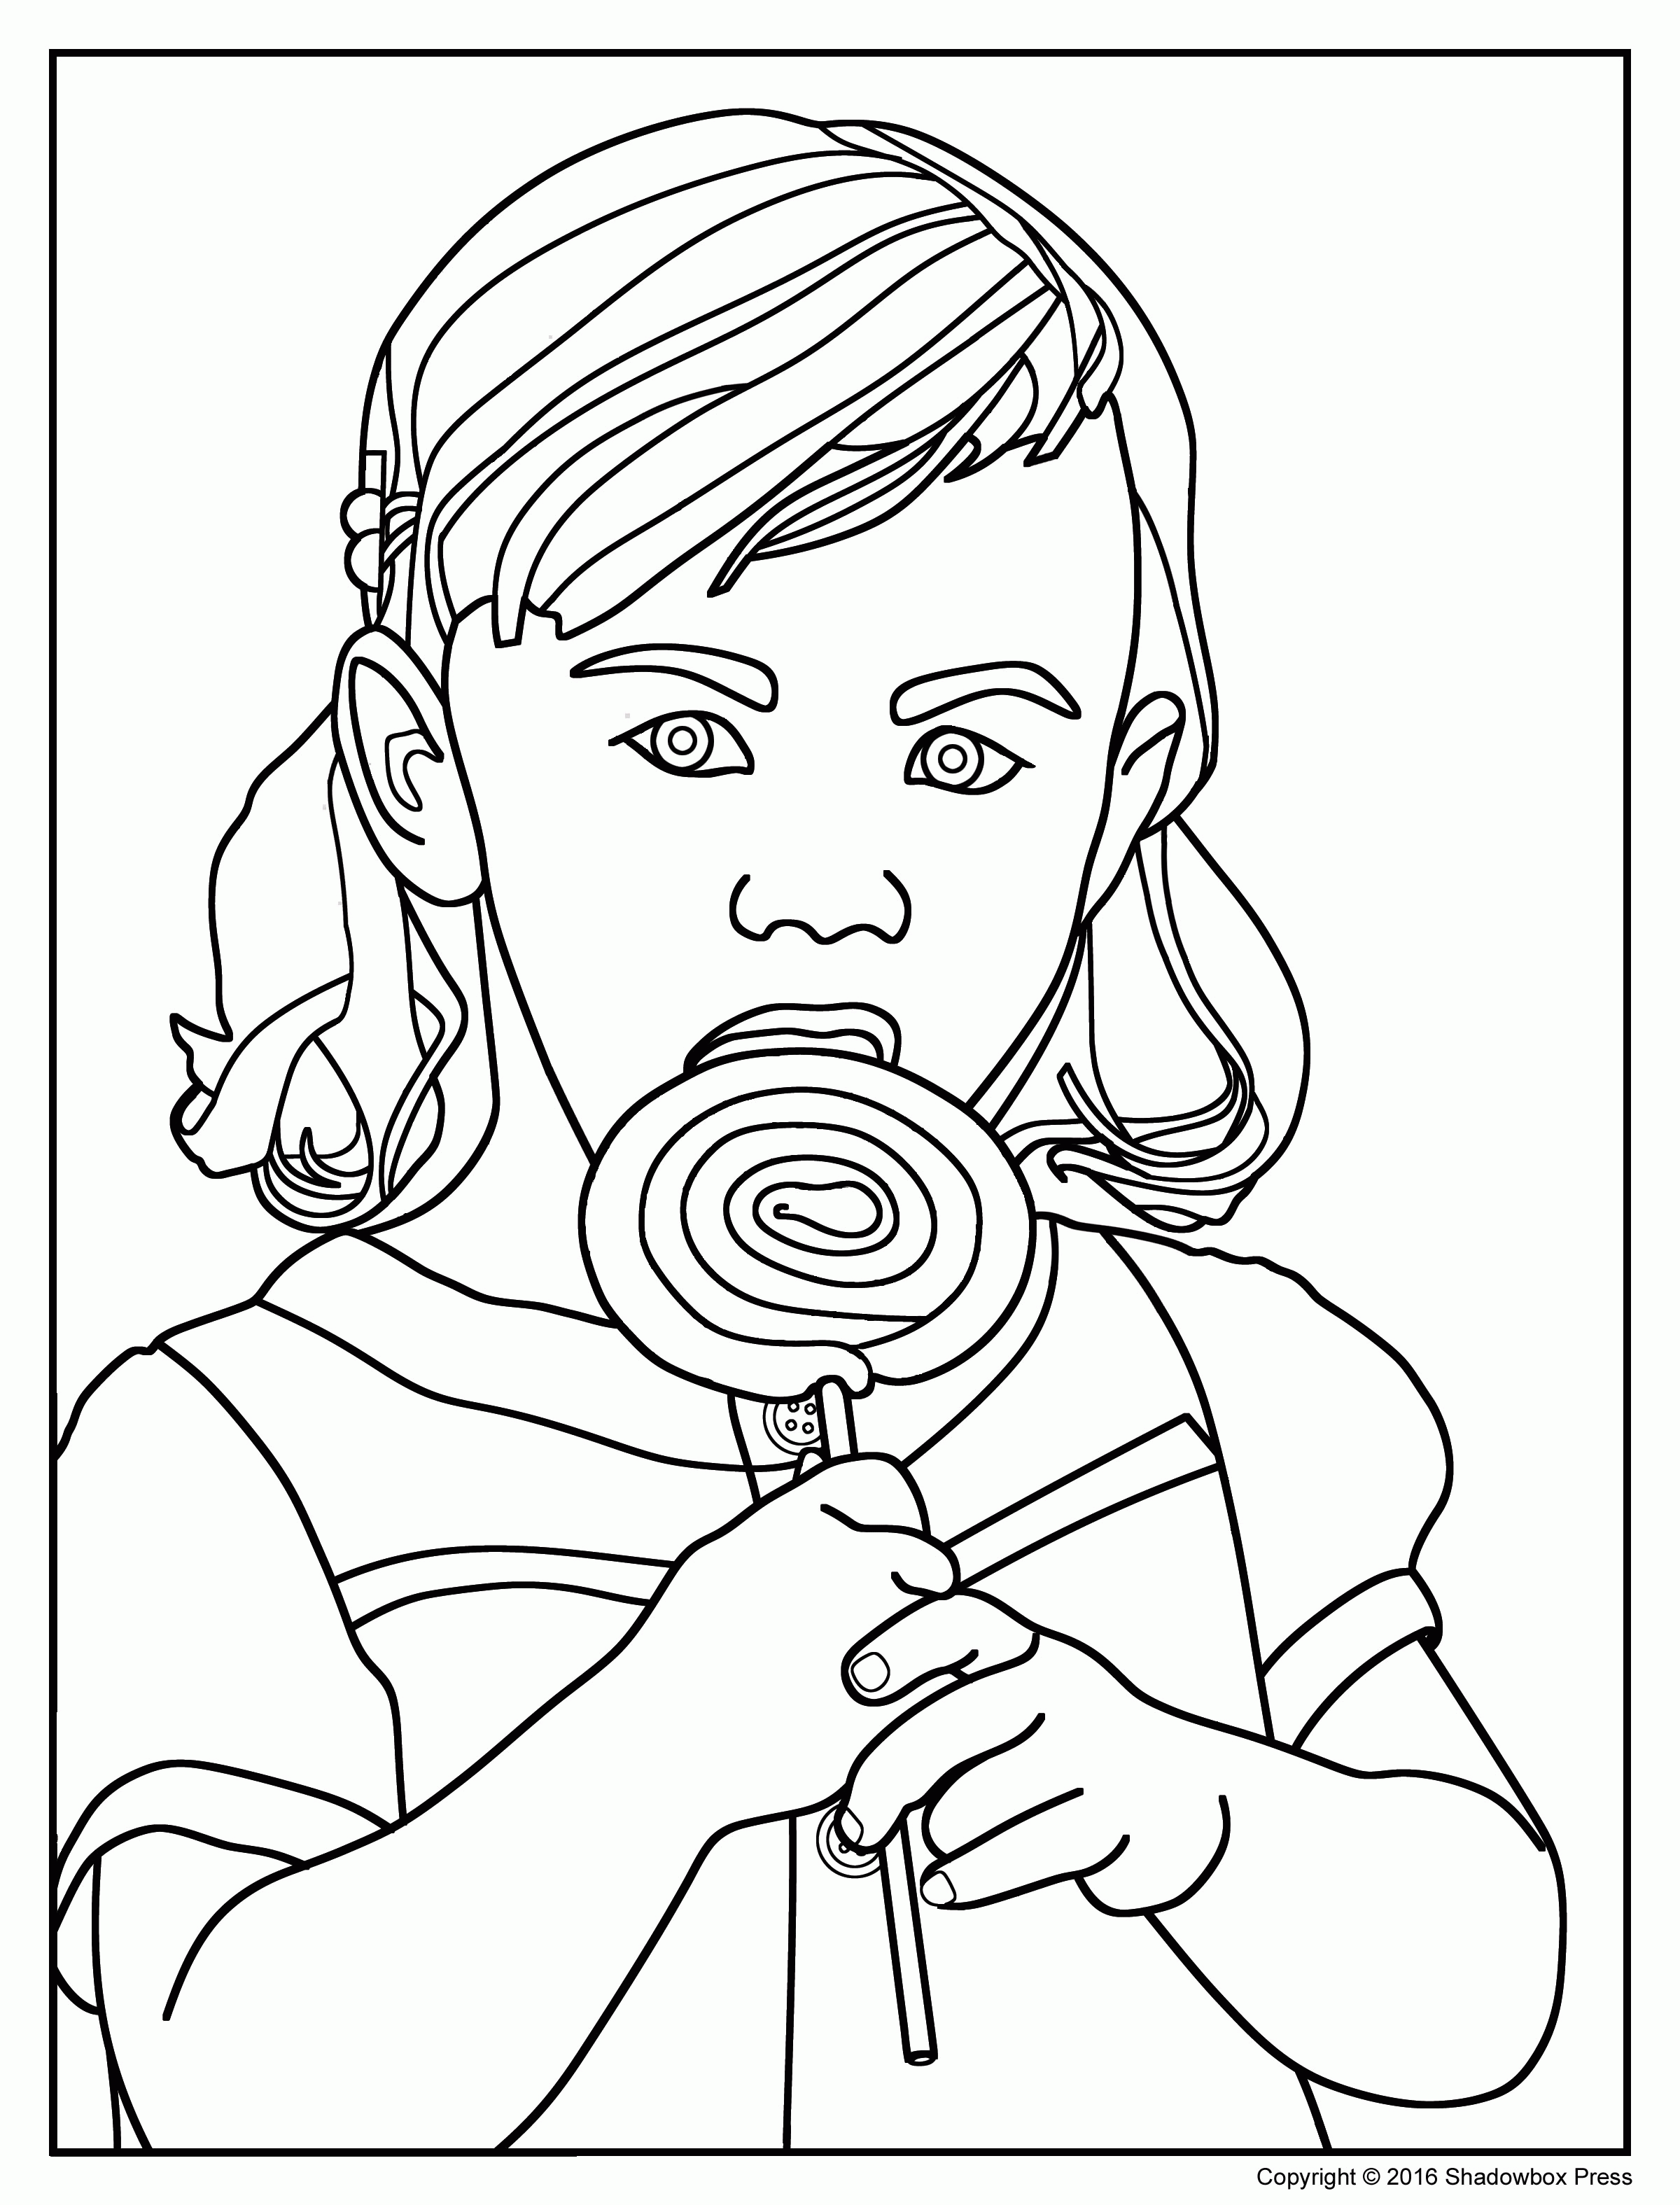 printable-coloring-pages-for-adults-with-dementia-coloring-pages